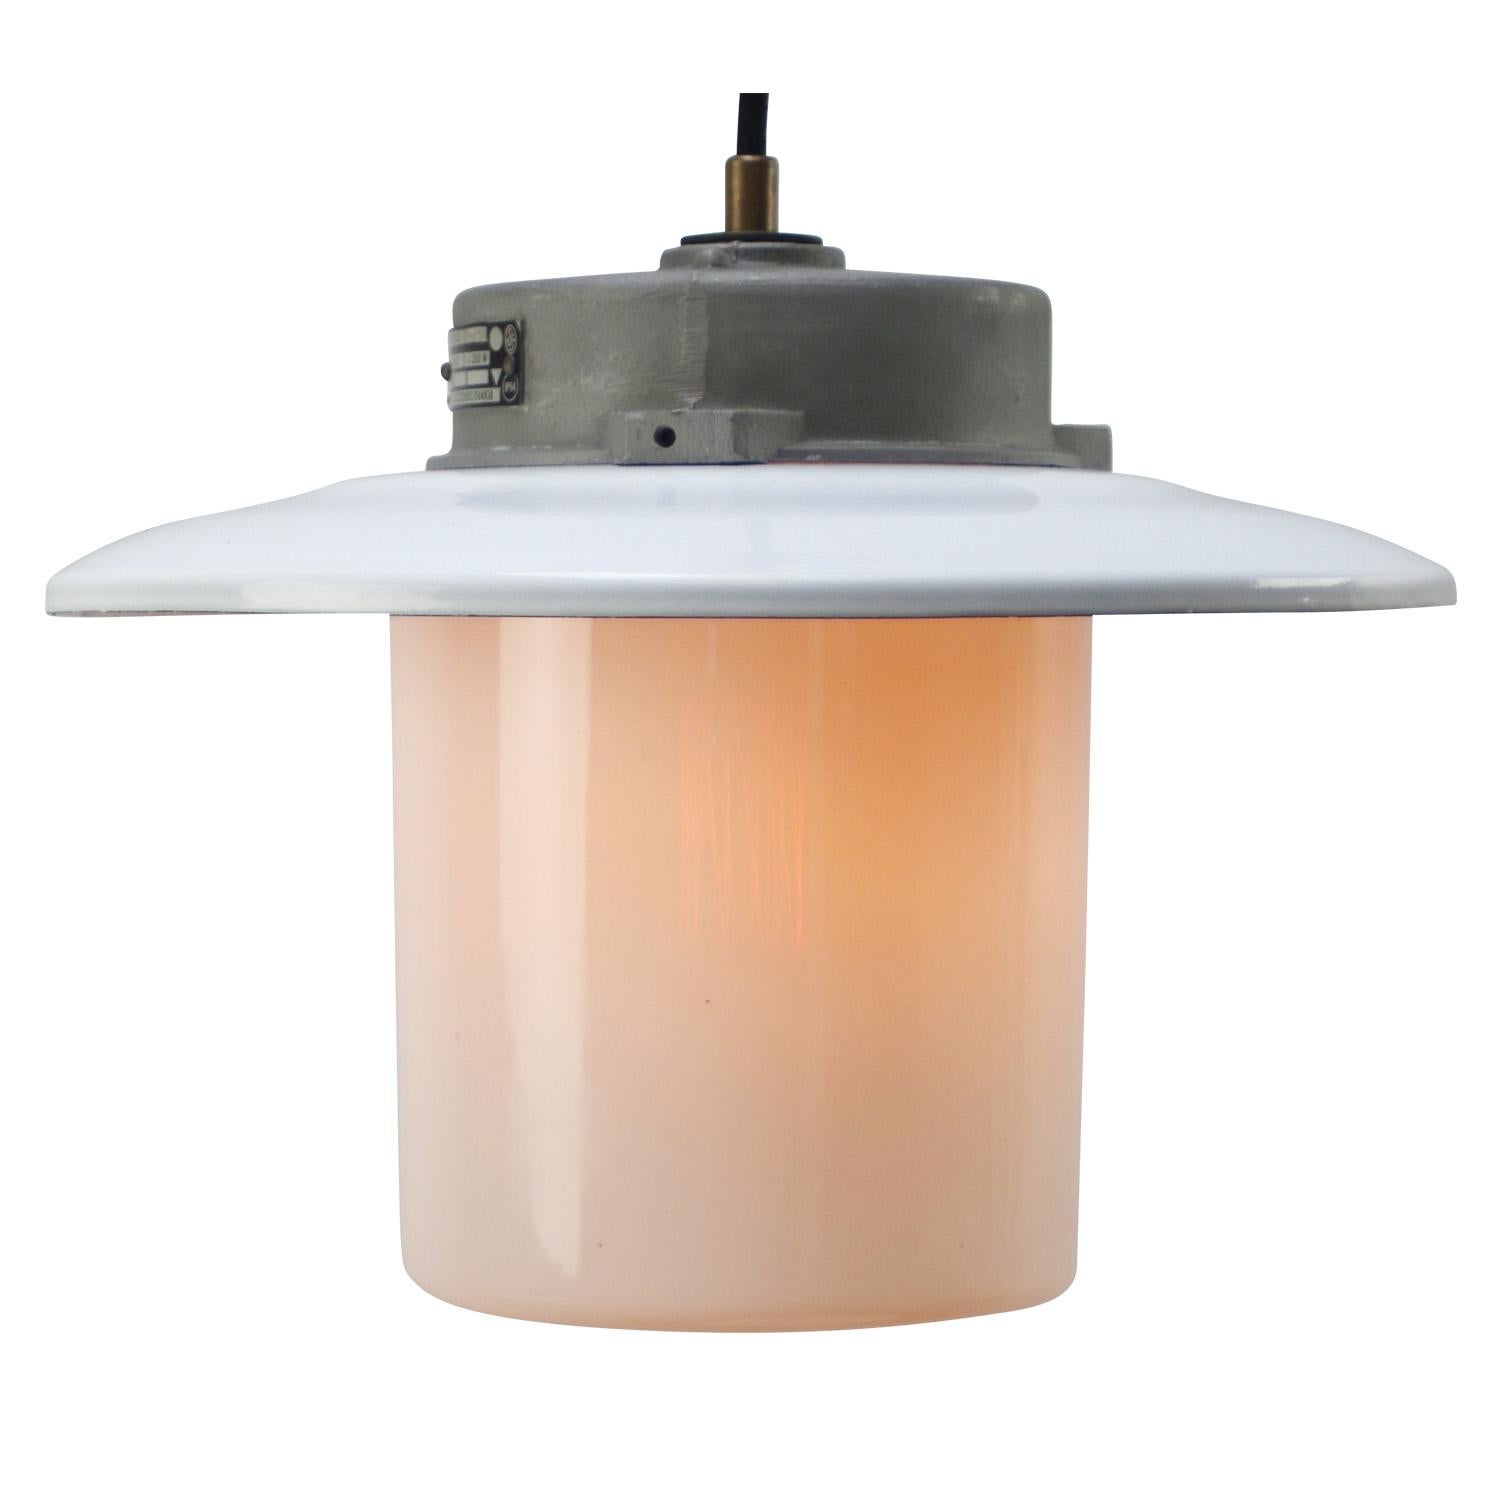 White enamel Industrial hanging lamp.
Opaline glass with aluminium top.

Weight: 2.00 kg / 4.4 lb

Priced per individual item. All lamps have been made suitable by international standards for incandescent light bulbs, energy-efficient and LED bulbs.